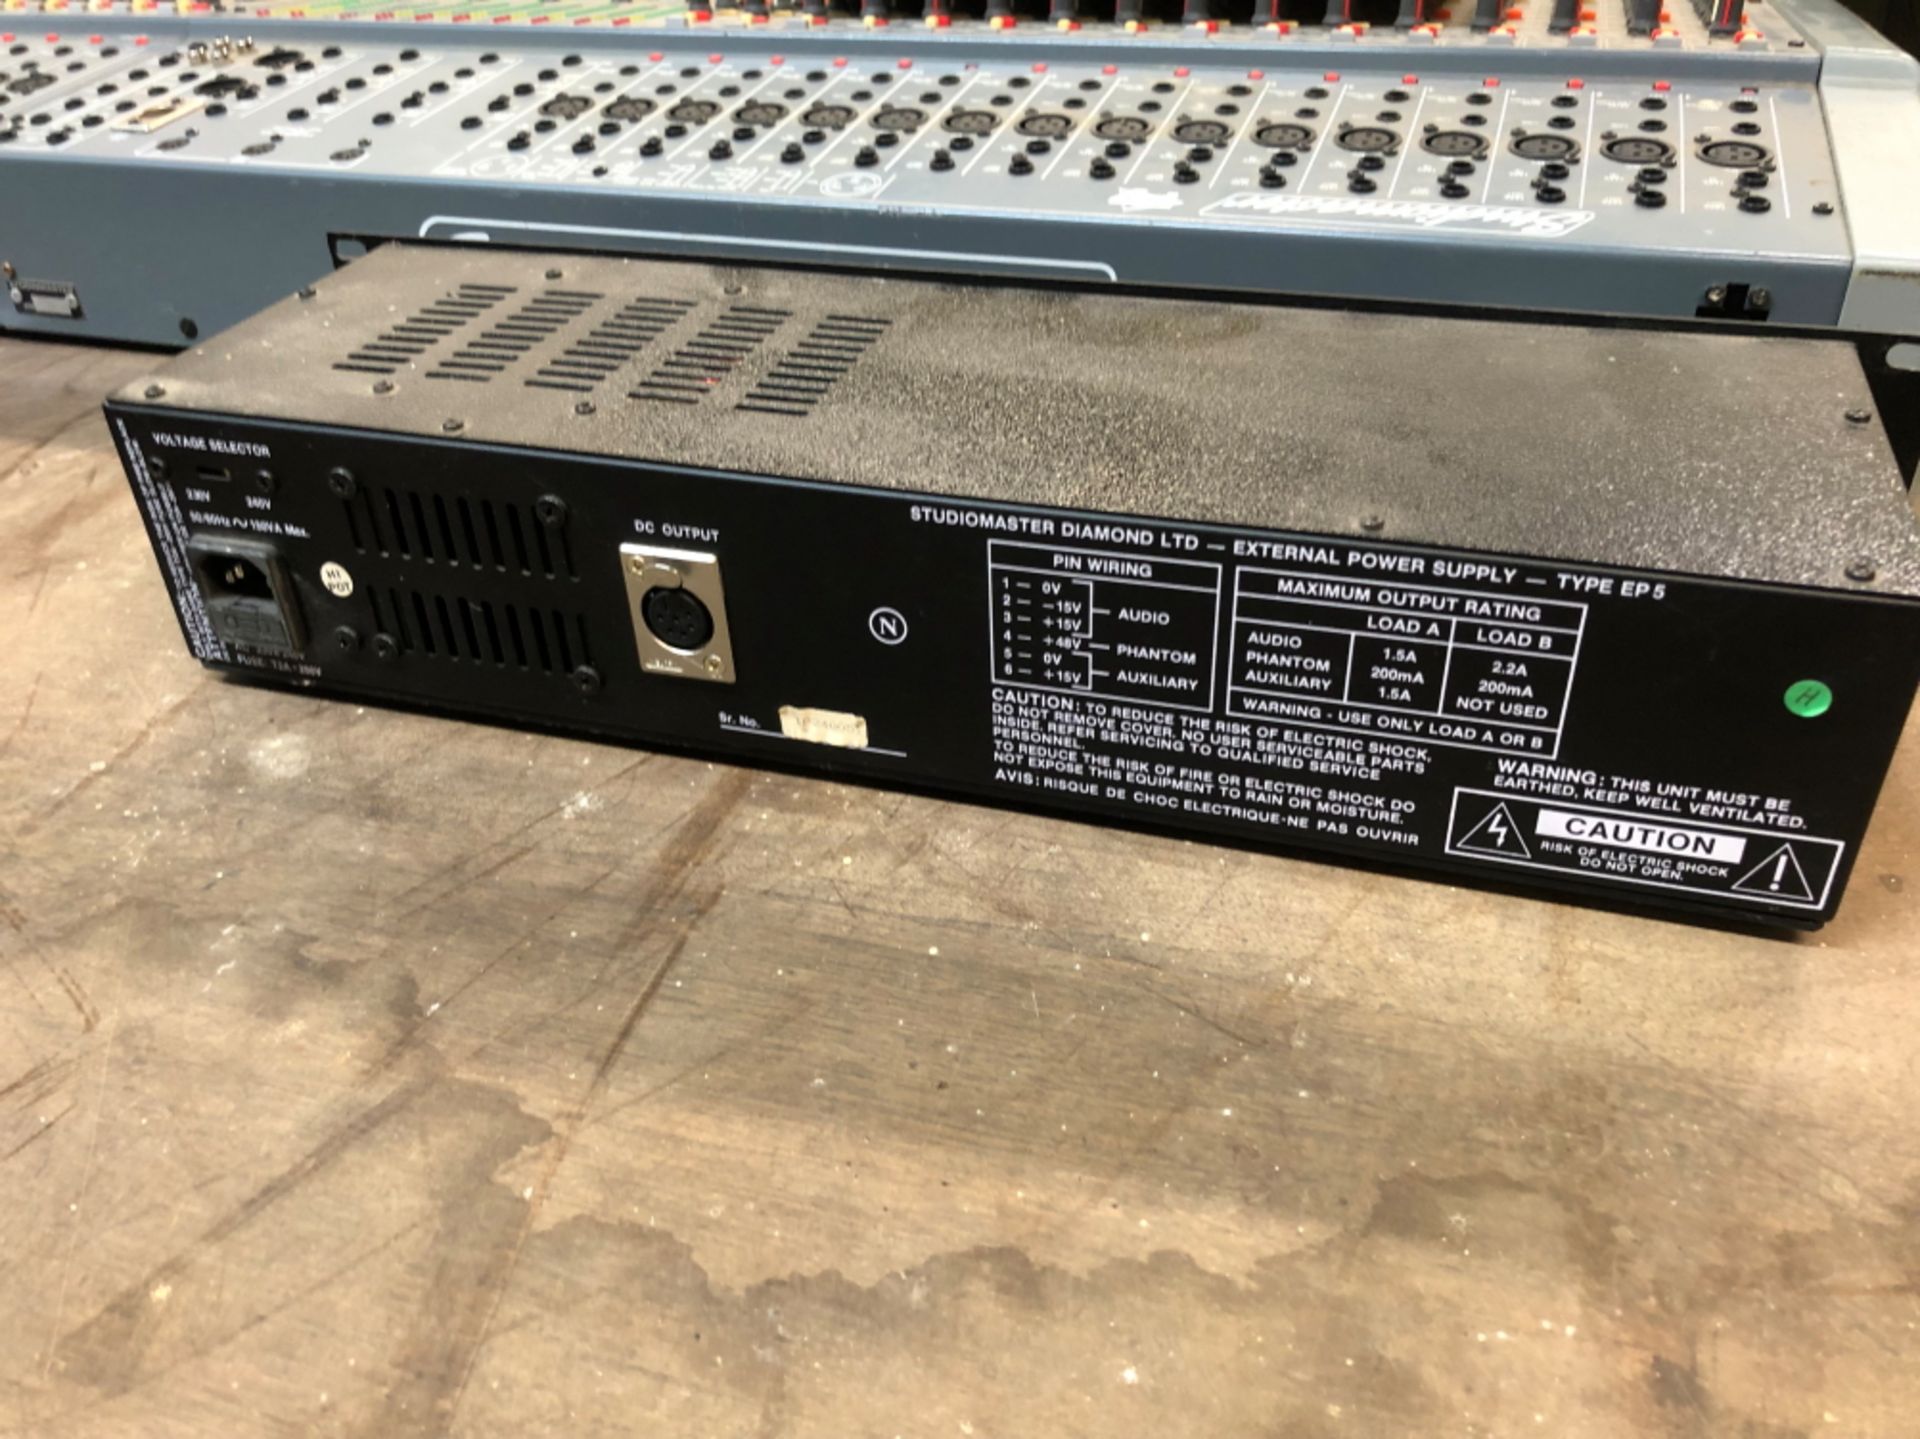 A STUDIO MASTER P7 MULTITRACK MIXING CONSOLE WITH MANUAL AND EXTERNAL POWER SUPPLY UNIT - Image 15 of 17